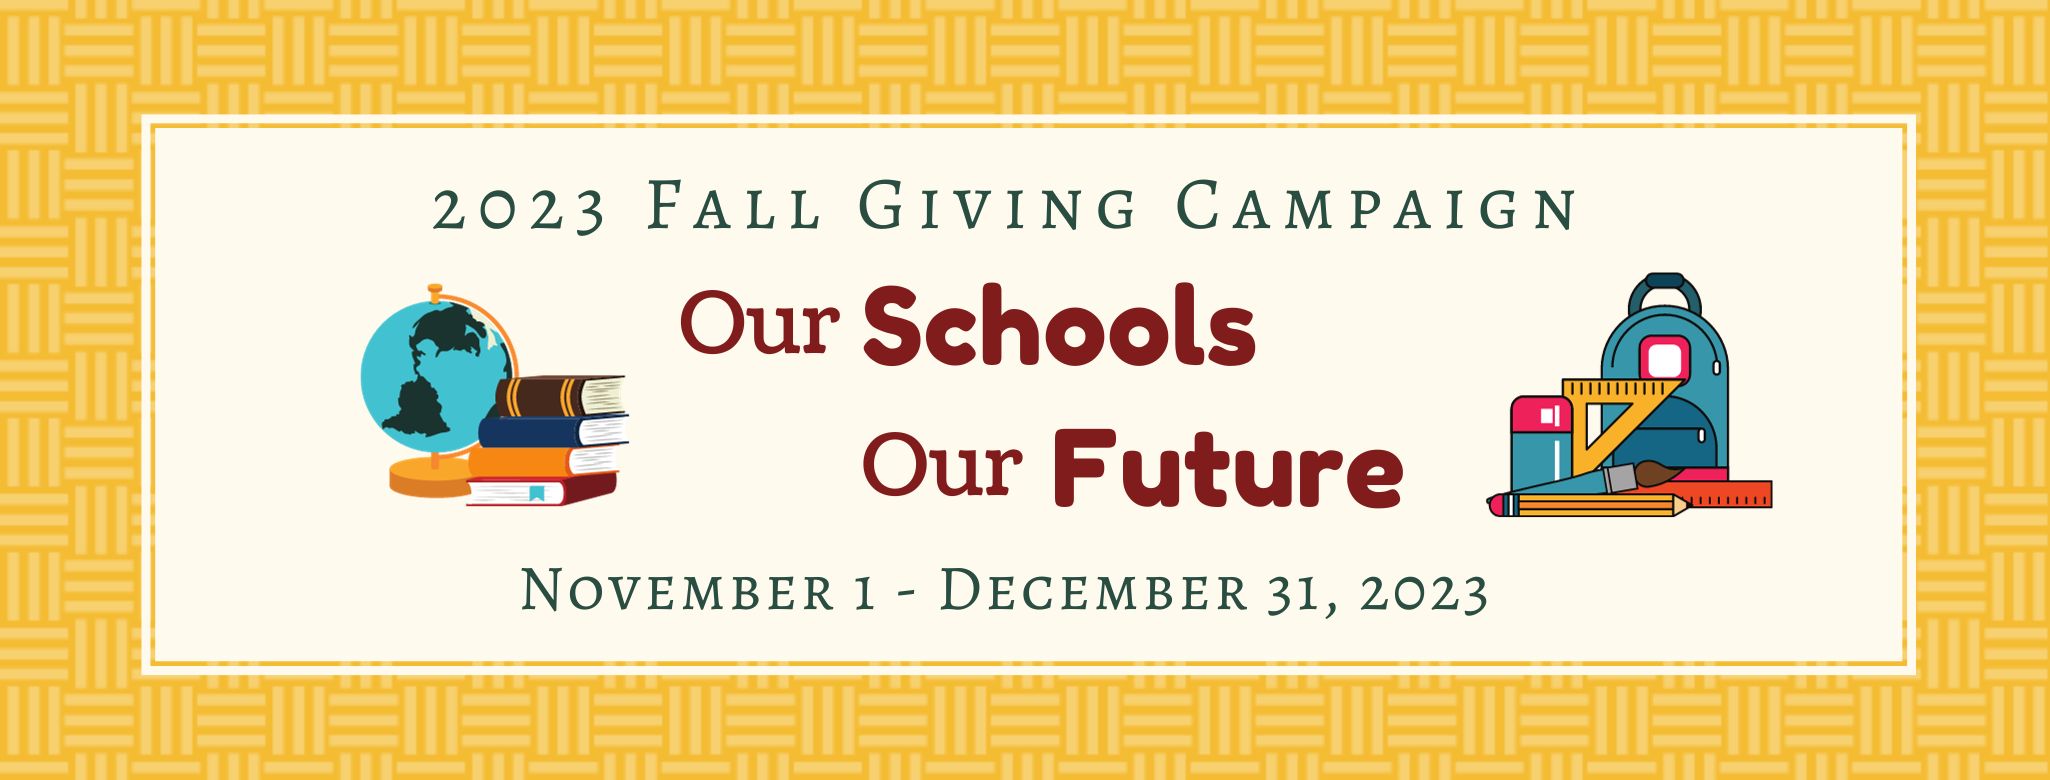 Our Schools, Our Future 2020 Fall Giving Campaign